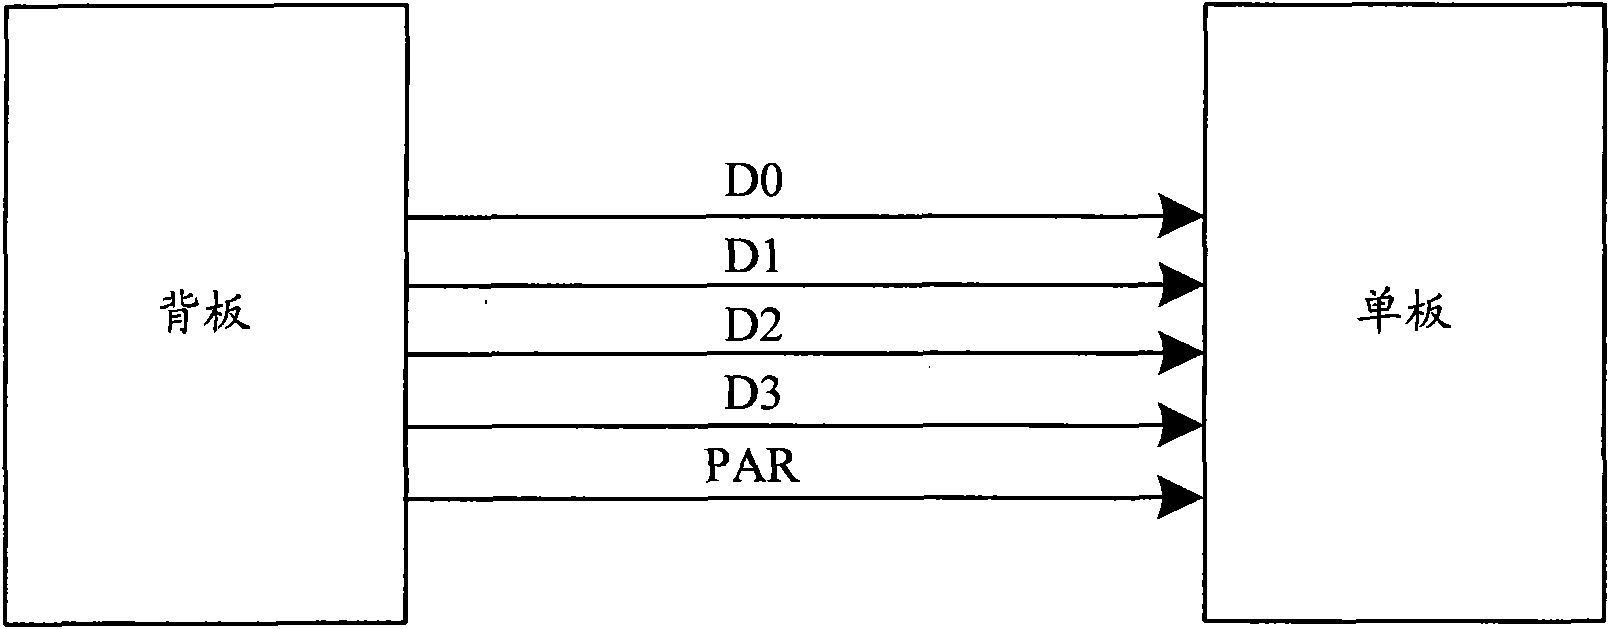 Method and system for improving reading reliability of data information between boards